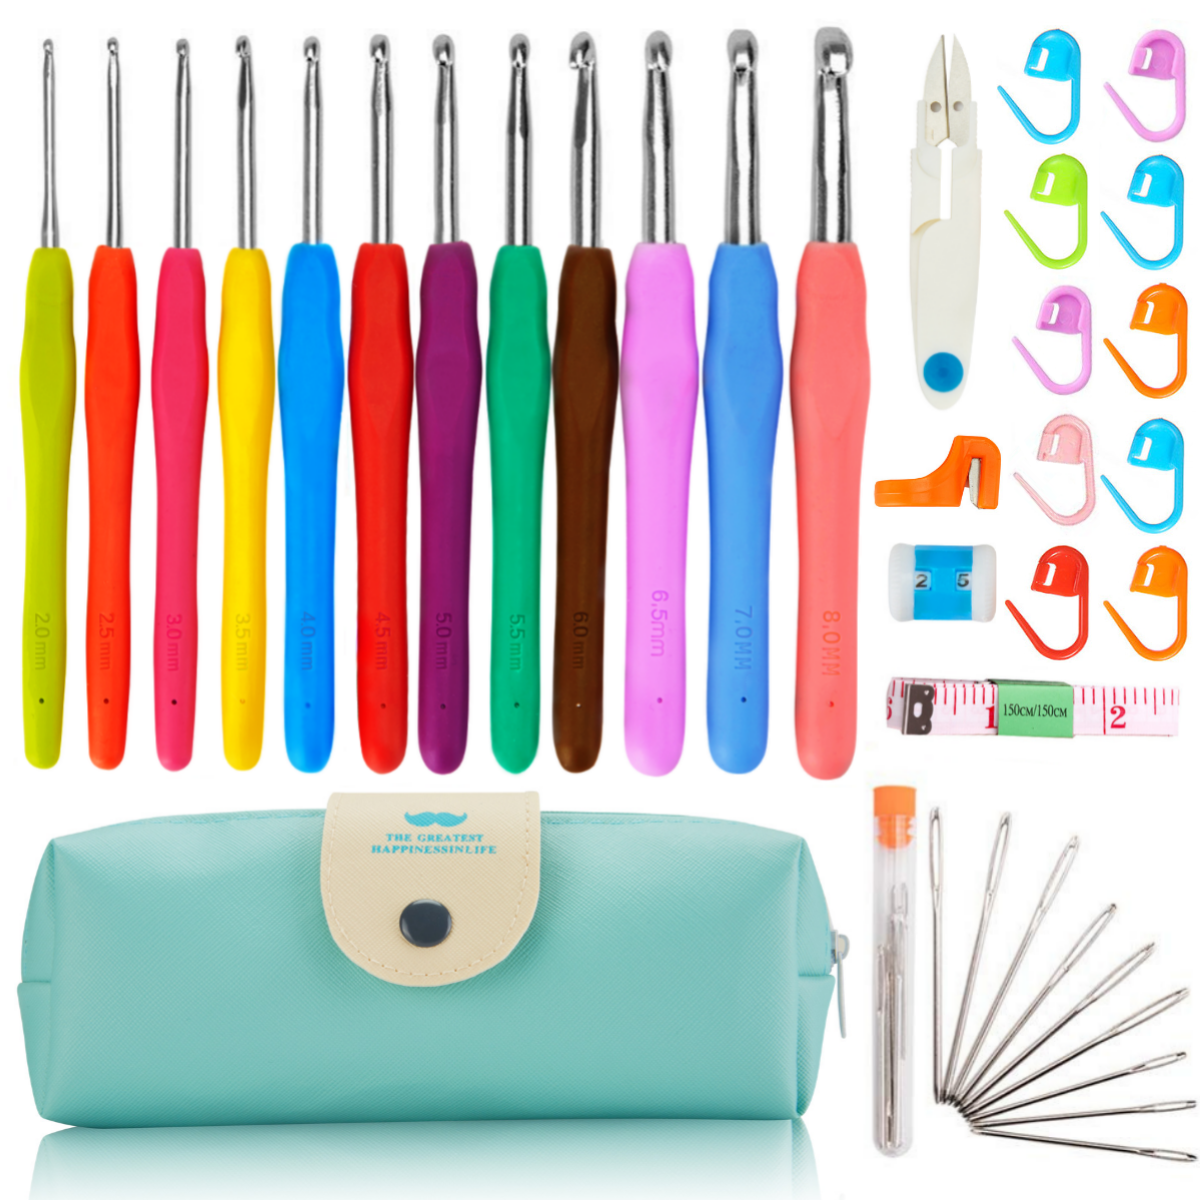 nghtmre lighted crochet hooks set- multiple sizes and colors available?  ergonomic grip handles & organizer. color